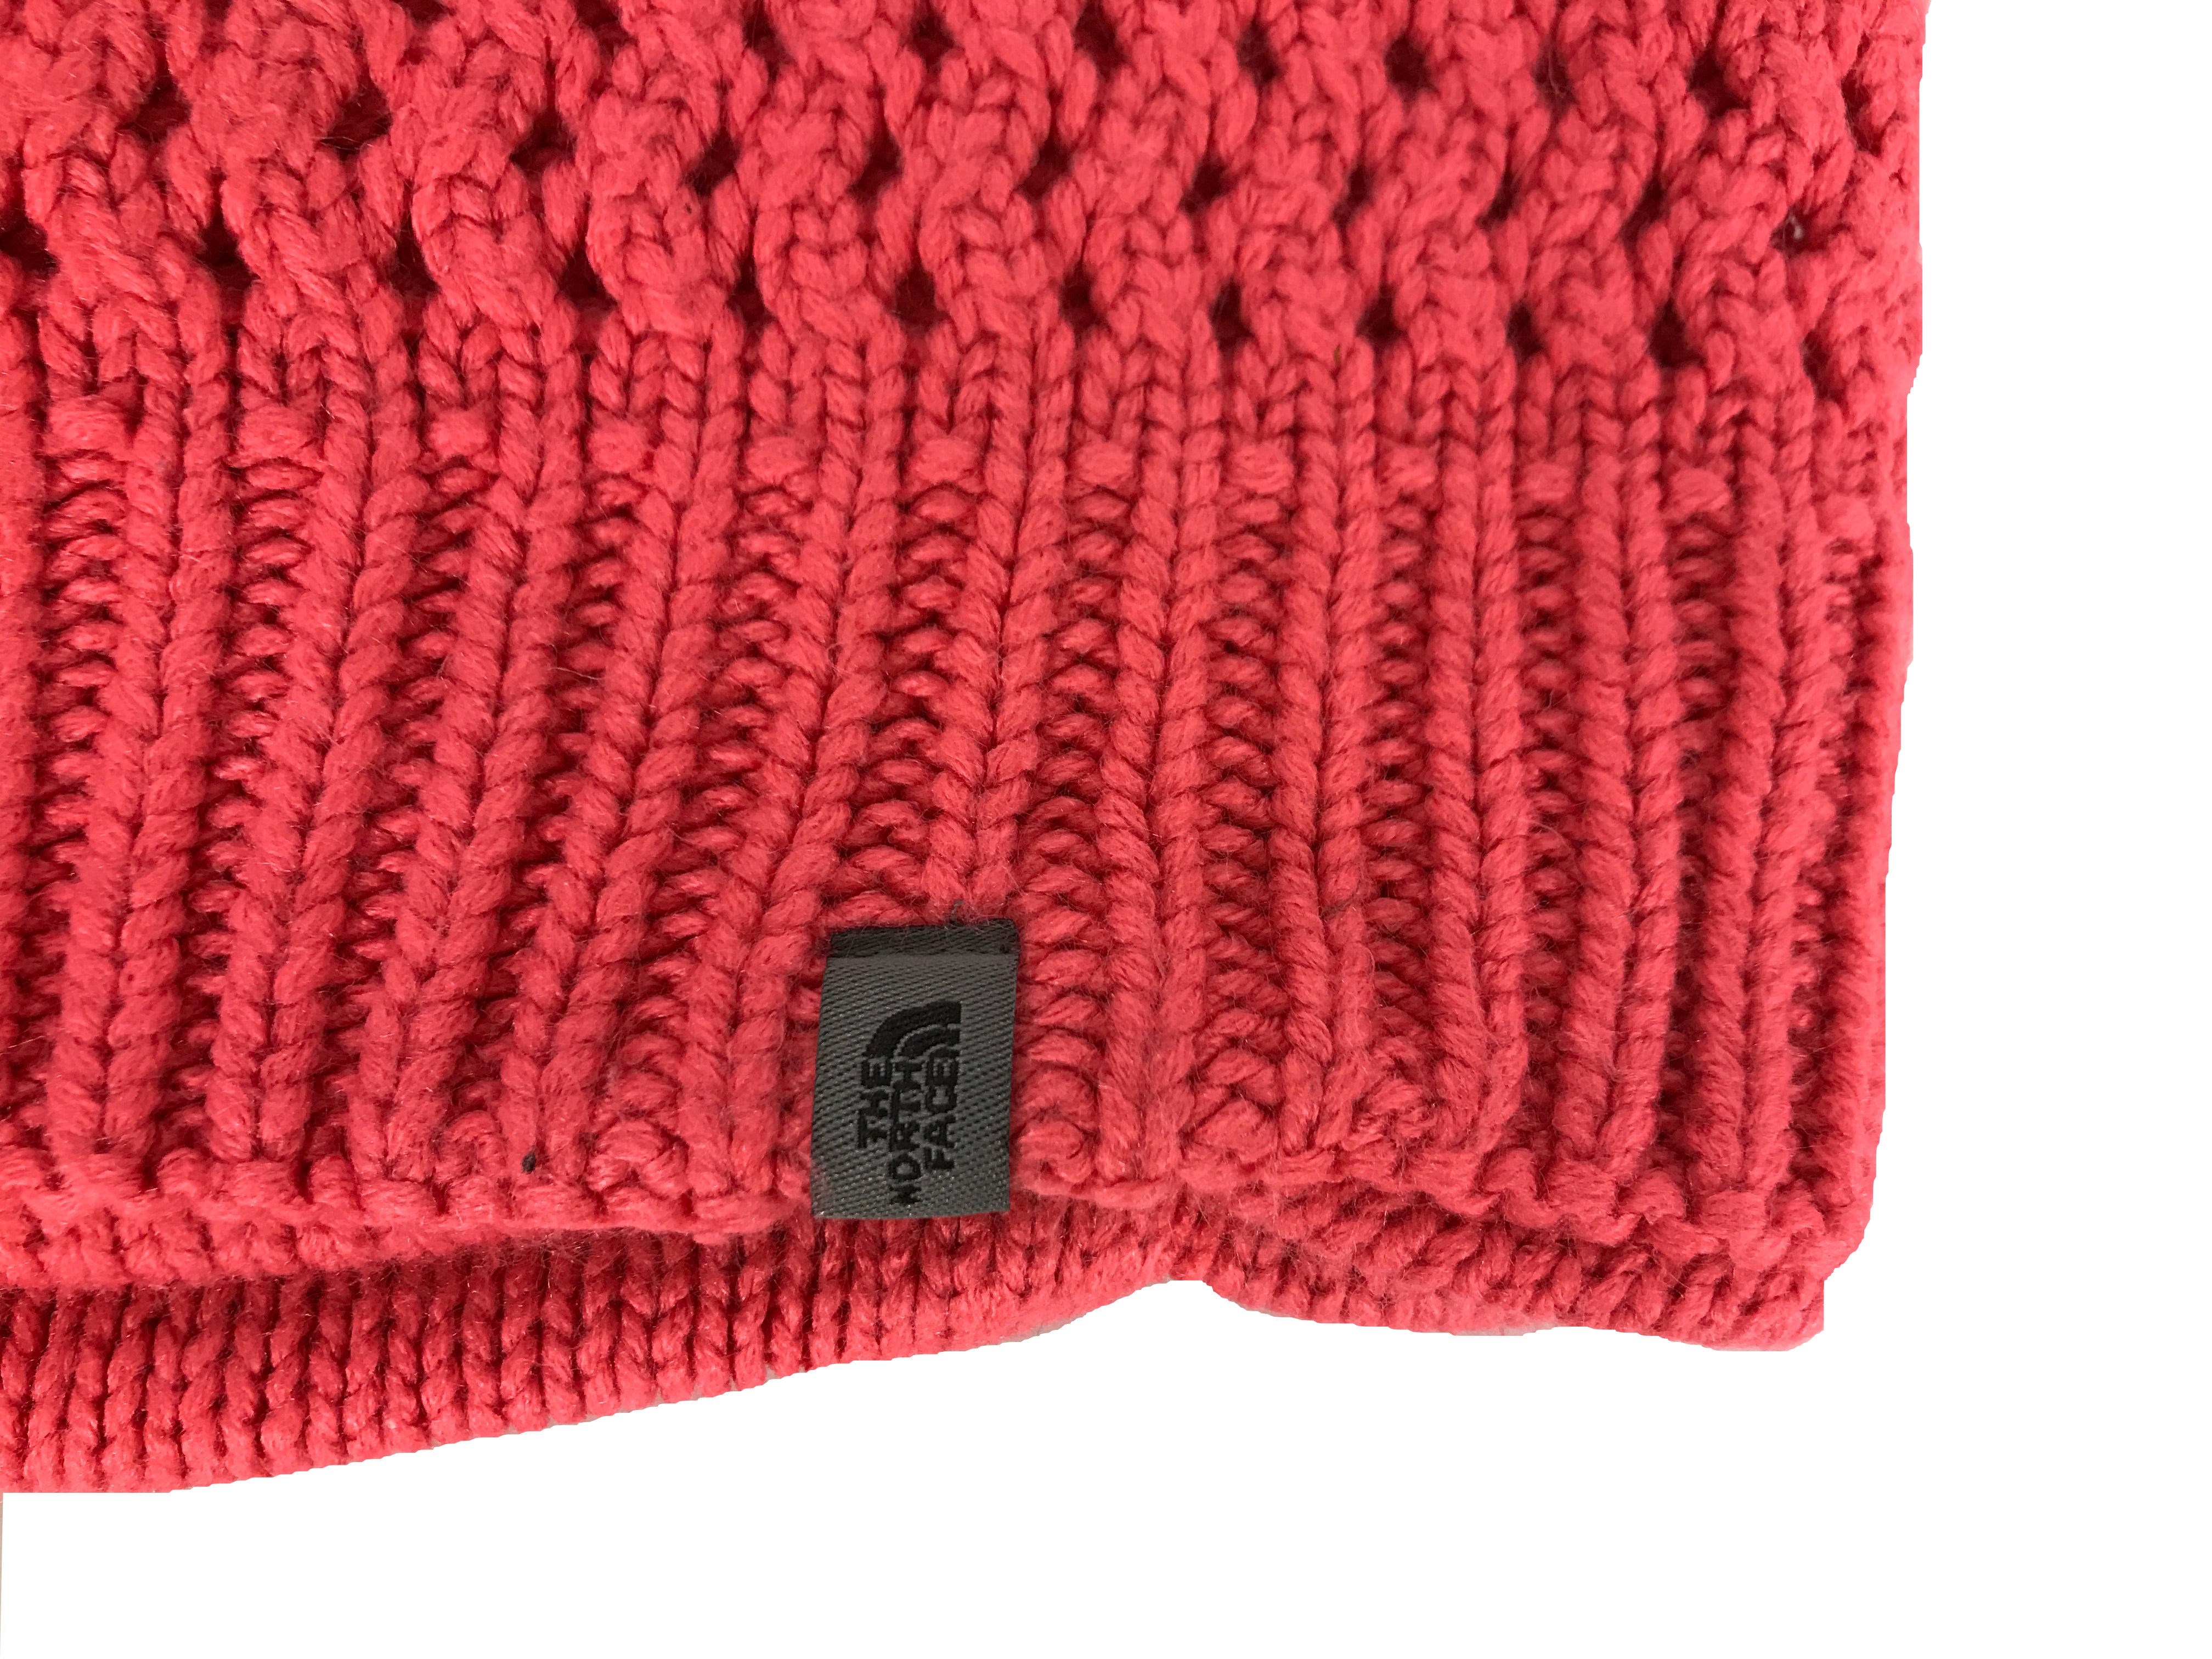 The North Face Pink Knit Beanie Hat